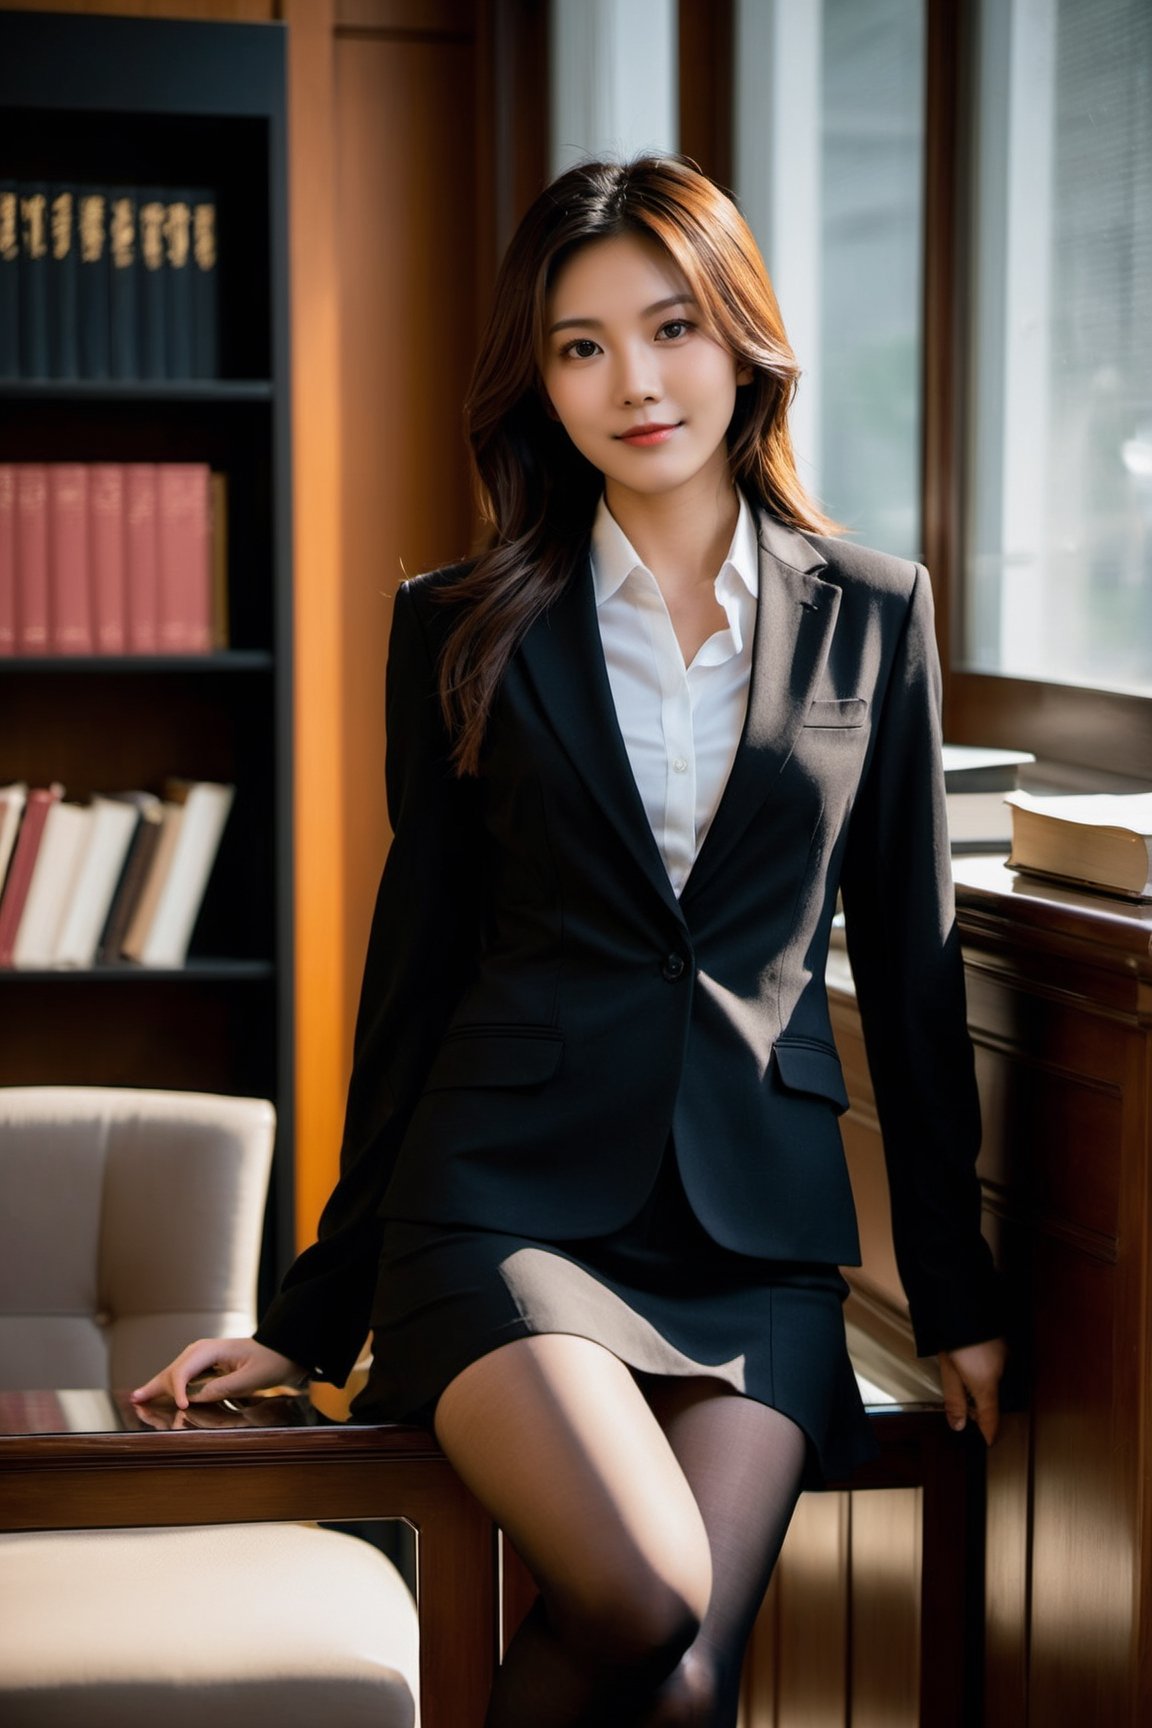 xxmix_girl, 1girl, Realistic, Candid Photo of an Asian female lawyer, scene set in a well-furnished office, books lining the shelves behind her, warm color temperature, calm demeanor emphasized, soft smile, ((black pantyhose)), hint of contentment evident, captured using a 50mm lens, balance between subject and surroundings, natural lighting from a nearby window, gentle shadows cast, serene atmosphere